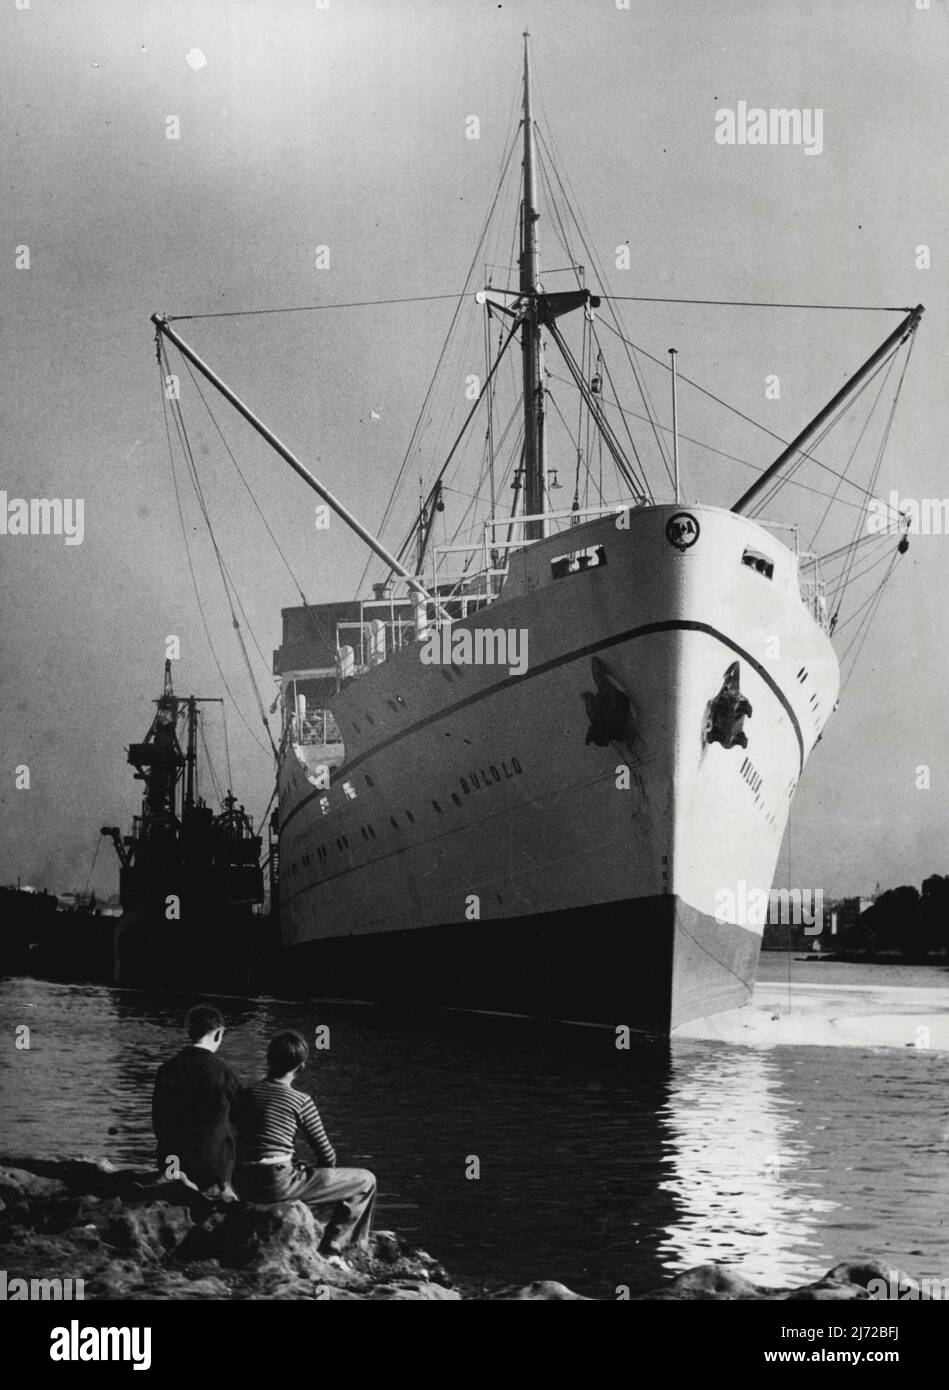 The Burns Phillip liner Bulolo IMN Kerosene Bay today. Left: The Burns Philip liner Bulolo lying upright in shallow water in ***** Wednesday after she began to list alarmingly while firemen were fighting a pontoon floating in 20 feet of water in a *****. August 30, 1951. (Photo by Bert Power/Fairfax Media). Stock Photo